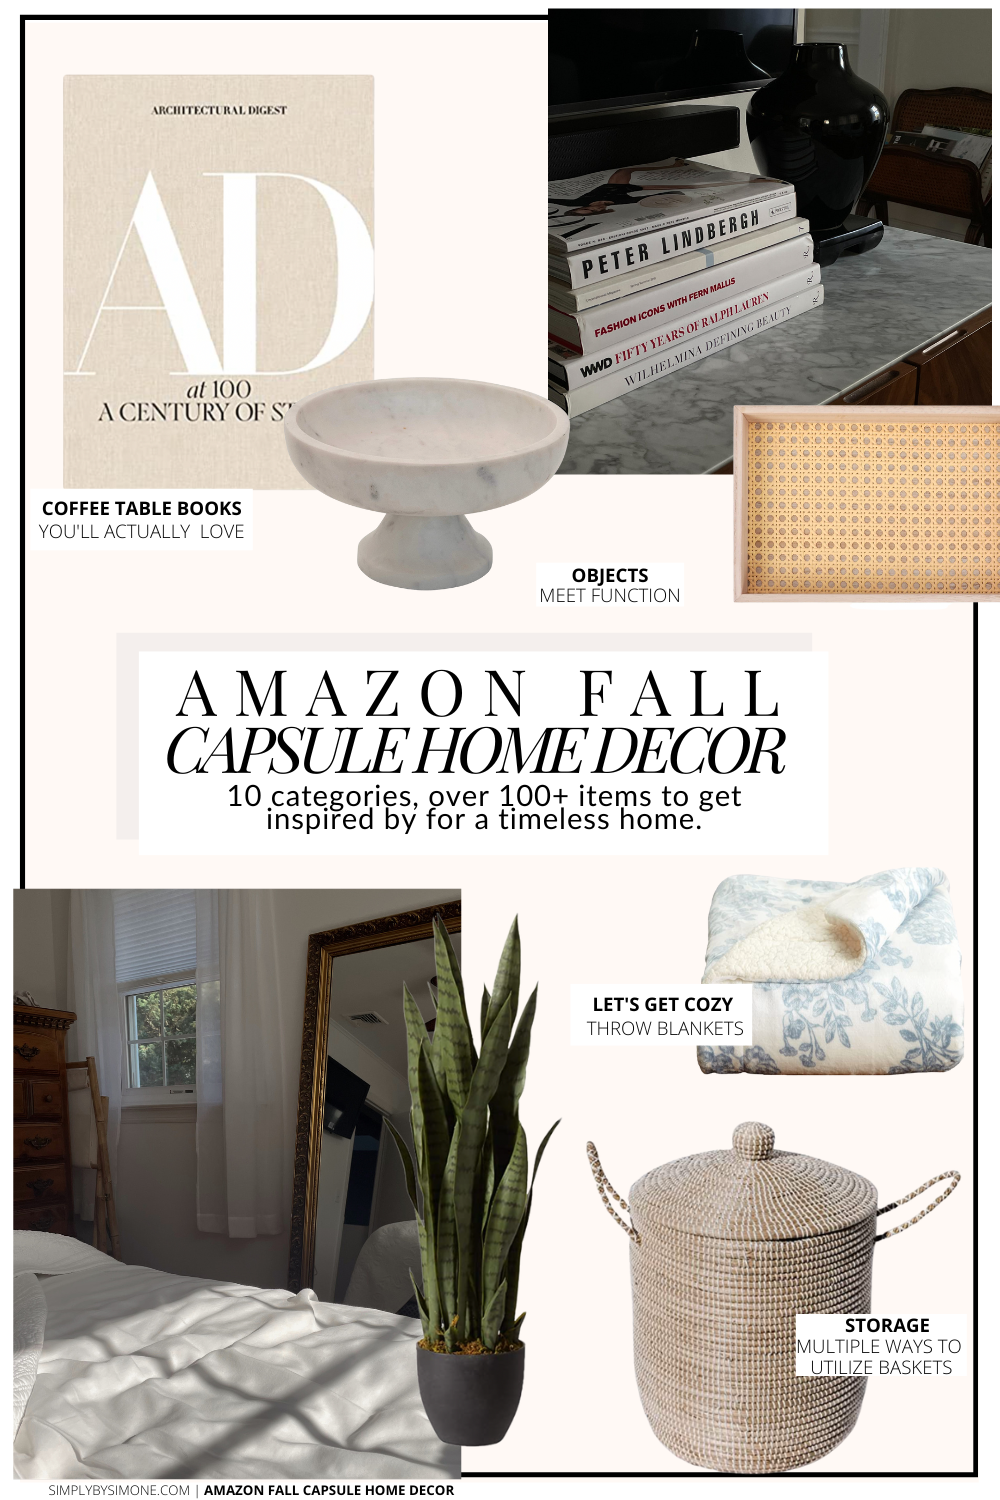 Affordable Amazon Fall Capsule Home Decor | 10 Items for Capsule Home Decor | How to Find Capsule Home Decor | Amazon Home Must Haves | Interior Inspiration | What is Capsule Home Decor | Timeless Home Decor Ideas for Fall | Fall Home Decor | Classic Home Decor for Fall | Amazon Home Decor Inspiration | Cover Image | Simply by Simone